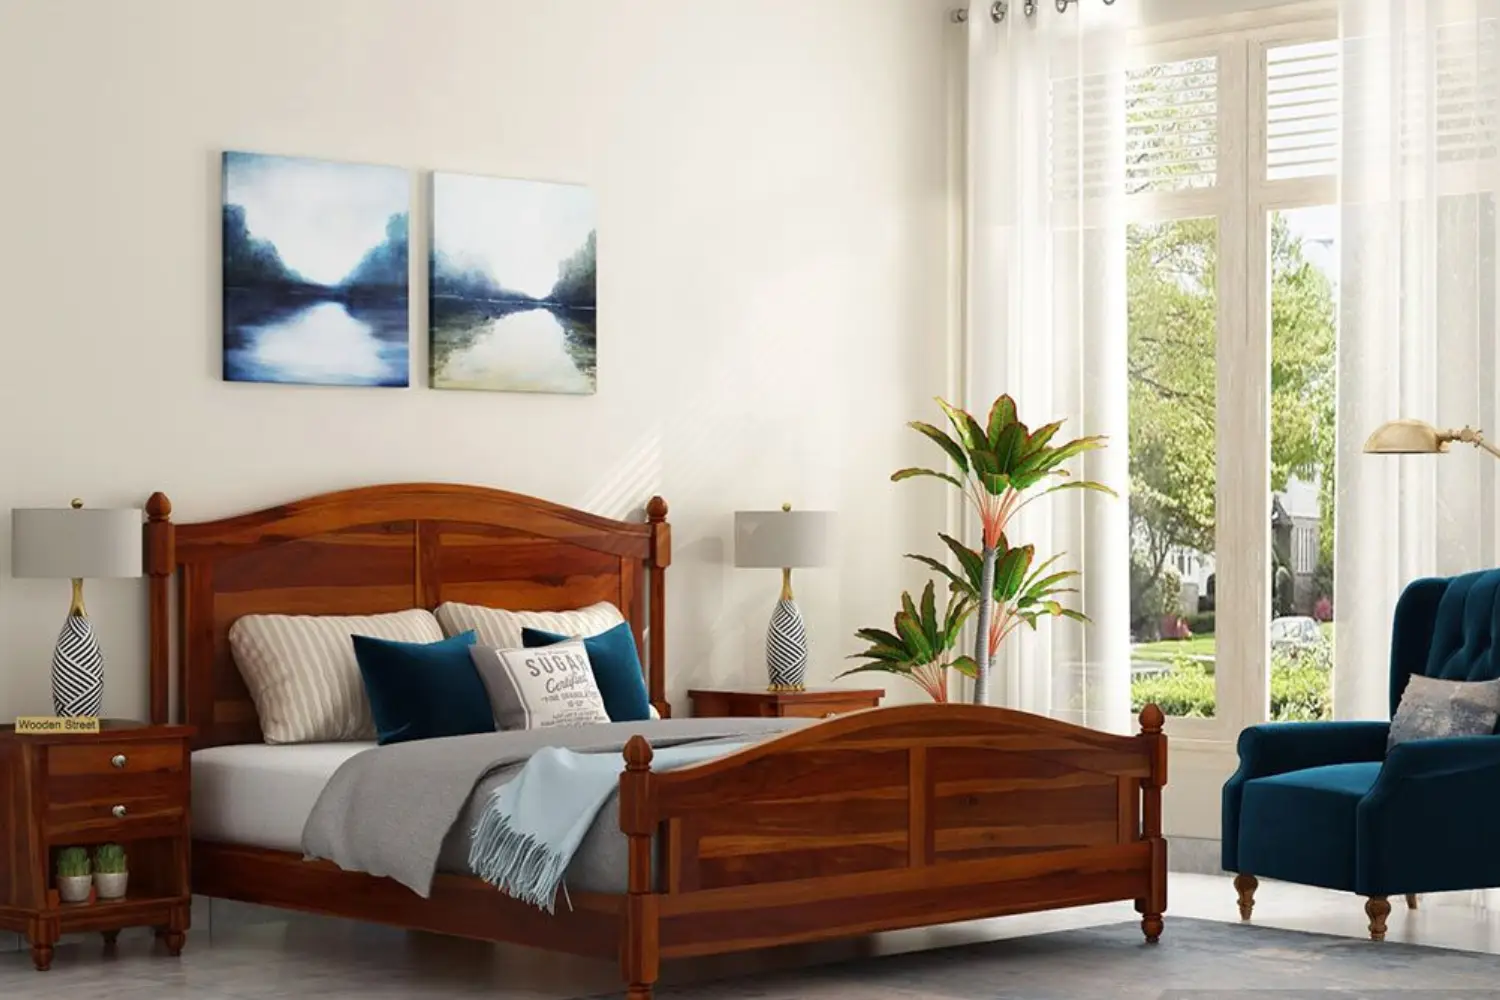 Wooden Cot Dealers in Chennai